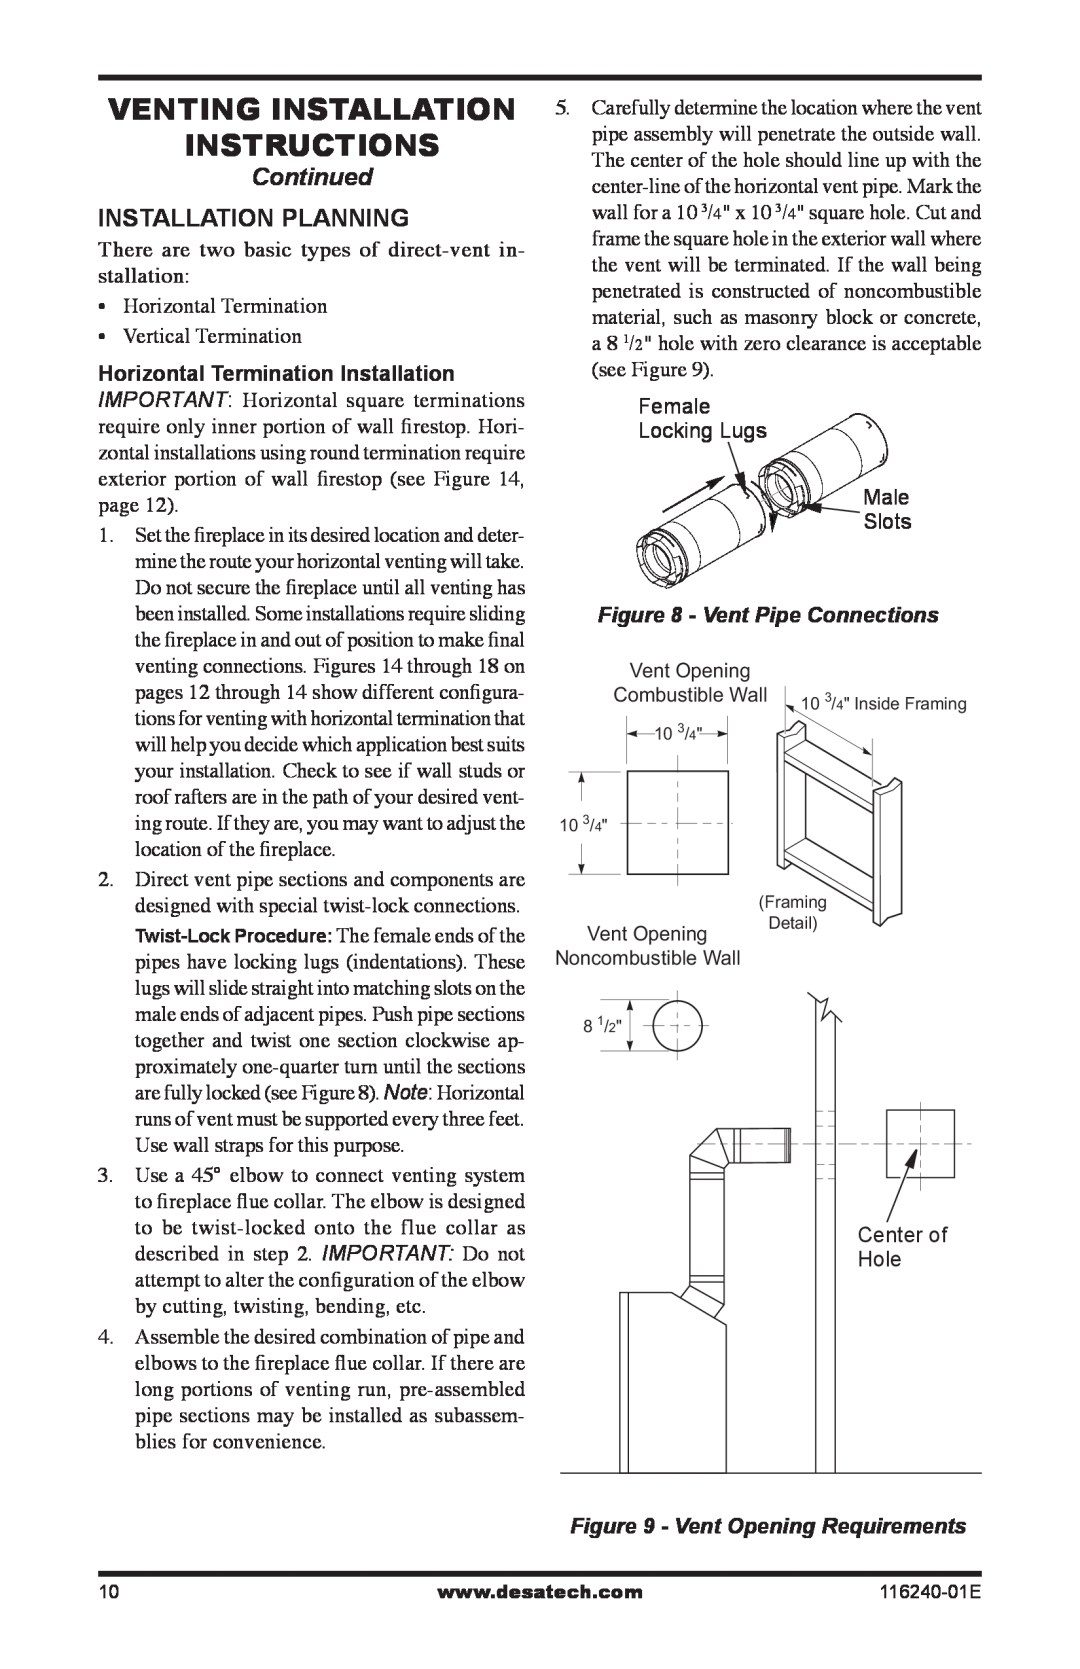 Desa (V)KC42PE Venting Installation instructions, Continued, Installation Planning, Vent Pipe Connections 